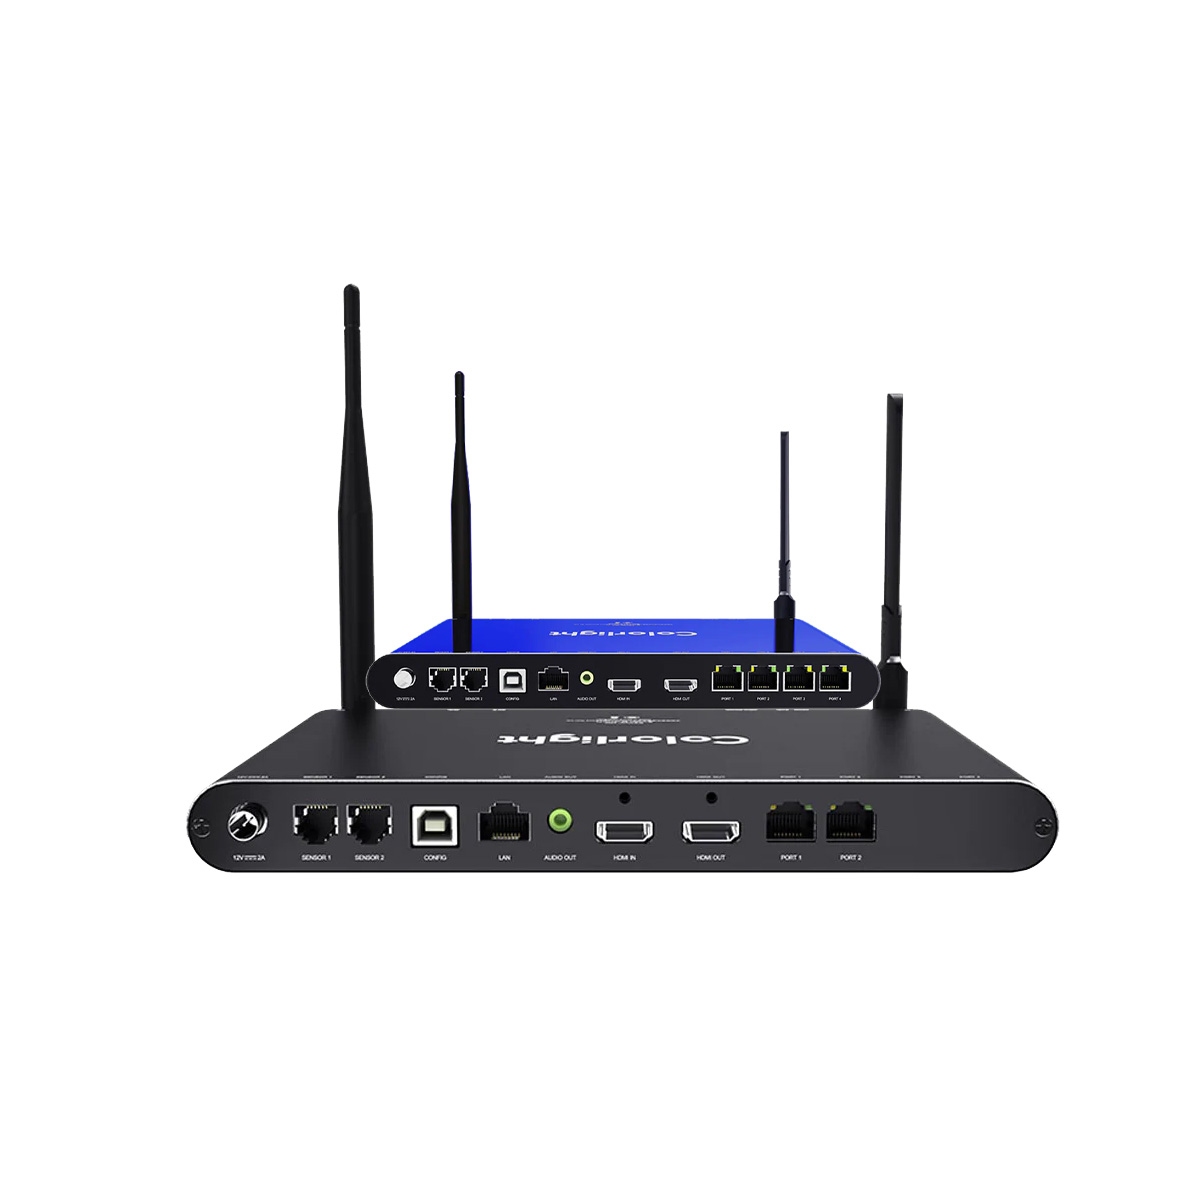 Colorlight A100/A200 Cloud Networking Player